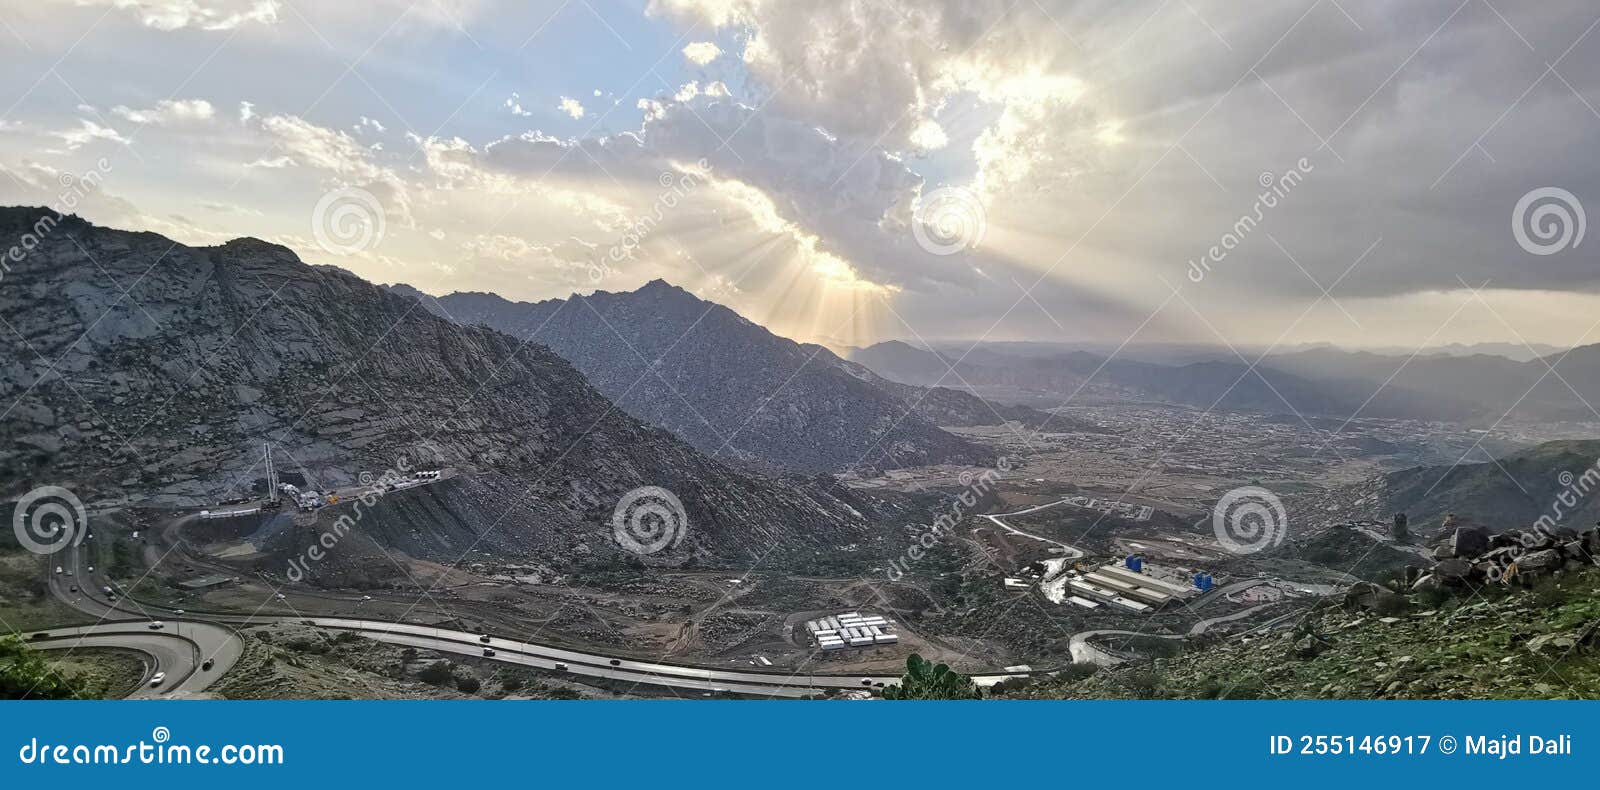 sunrise with some clouds on al hada - taif road